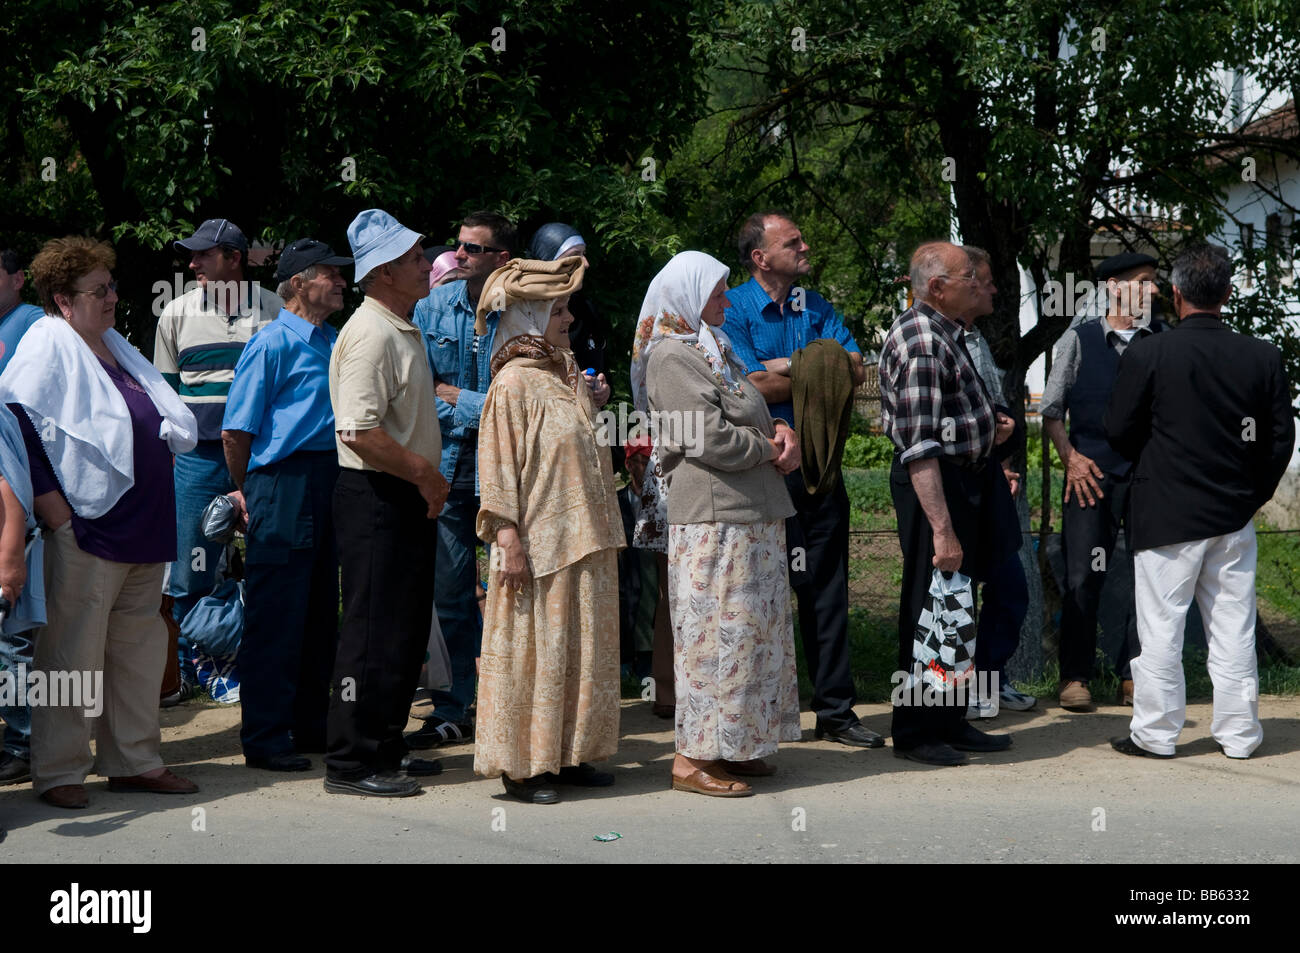 Muslim Bosniaks or Bosniacs going to a reburial of victims of the Srebrenica massacre in Republika Srpska an entity of Bosnia and Herzegovina Stock Photo